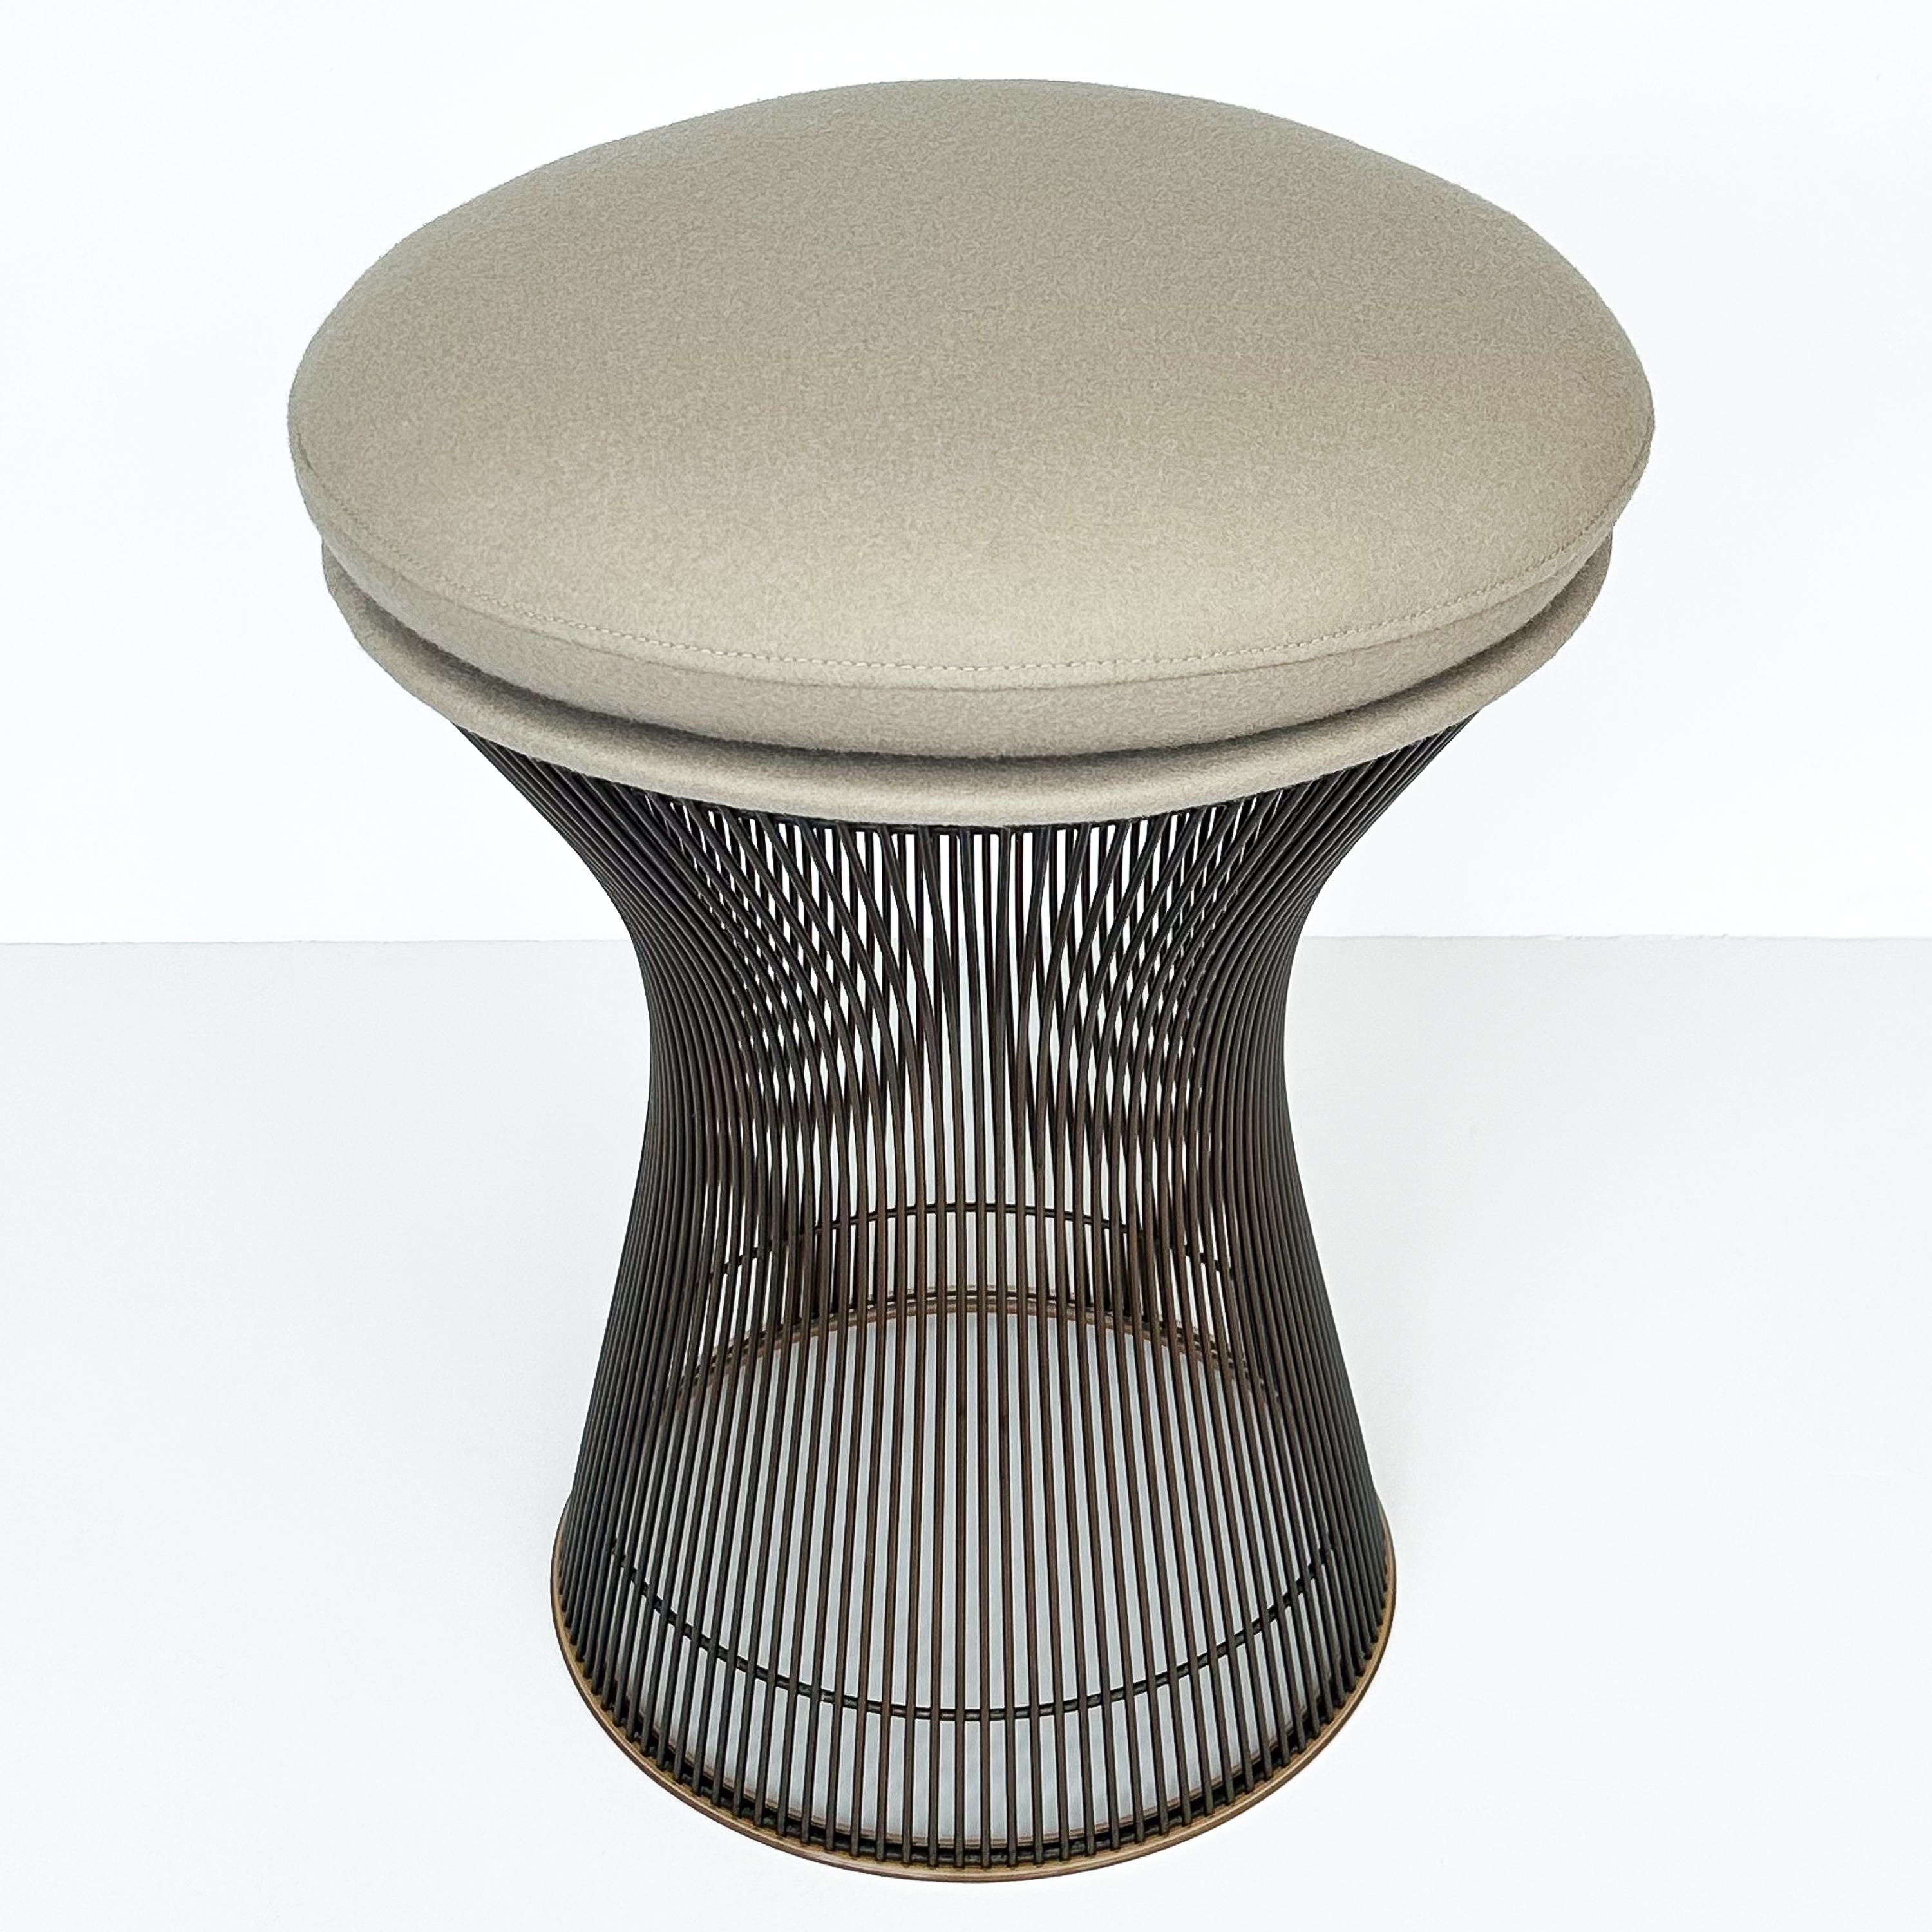 Original Warren Platner Bronze Stool by Knoll 1960s In Good Condition For Sale In Chicago, IL